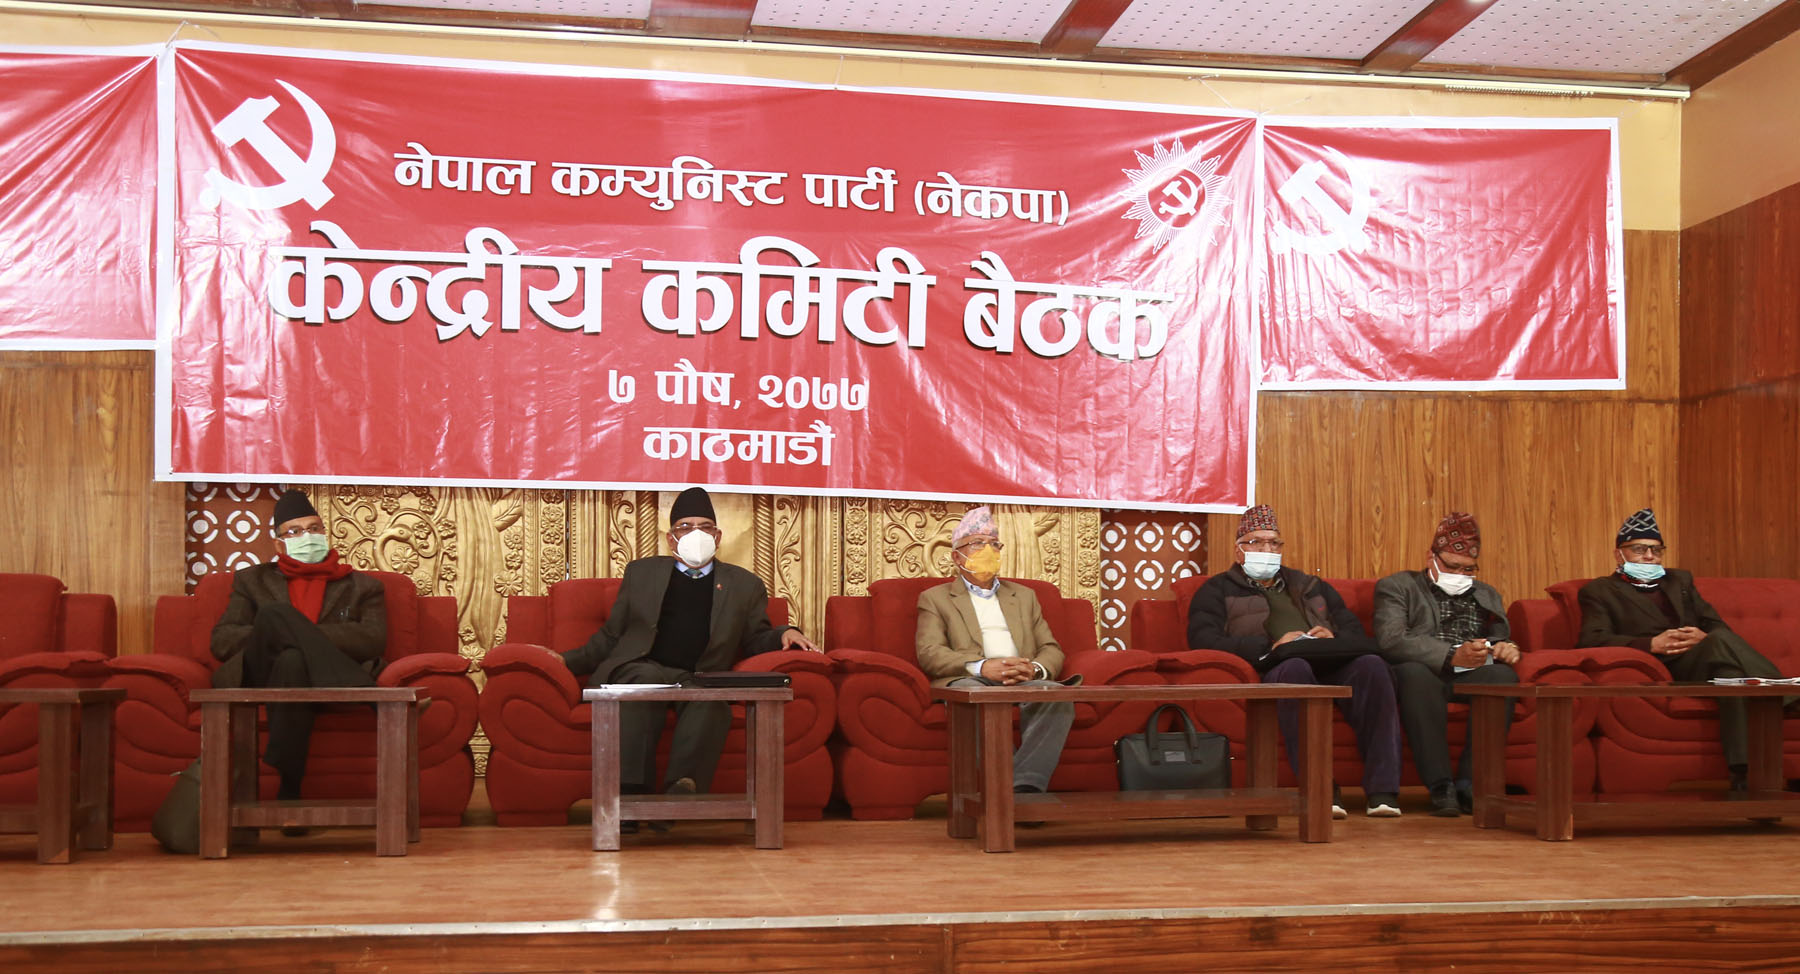 Prachanda-Nepal faction suspends eight leaders, including Nembang for 6 months